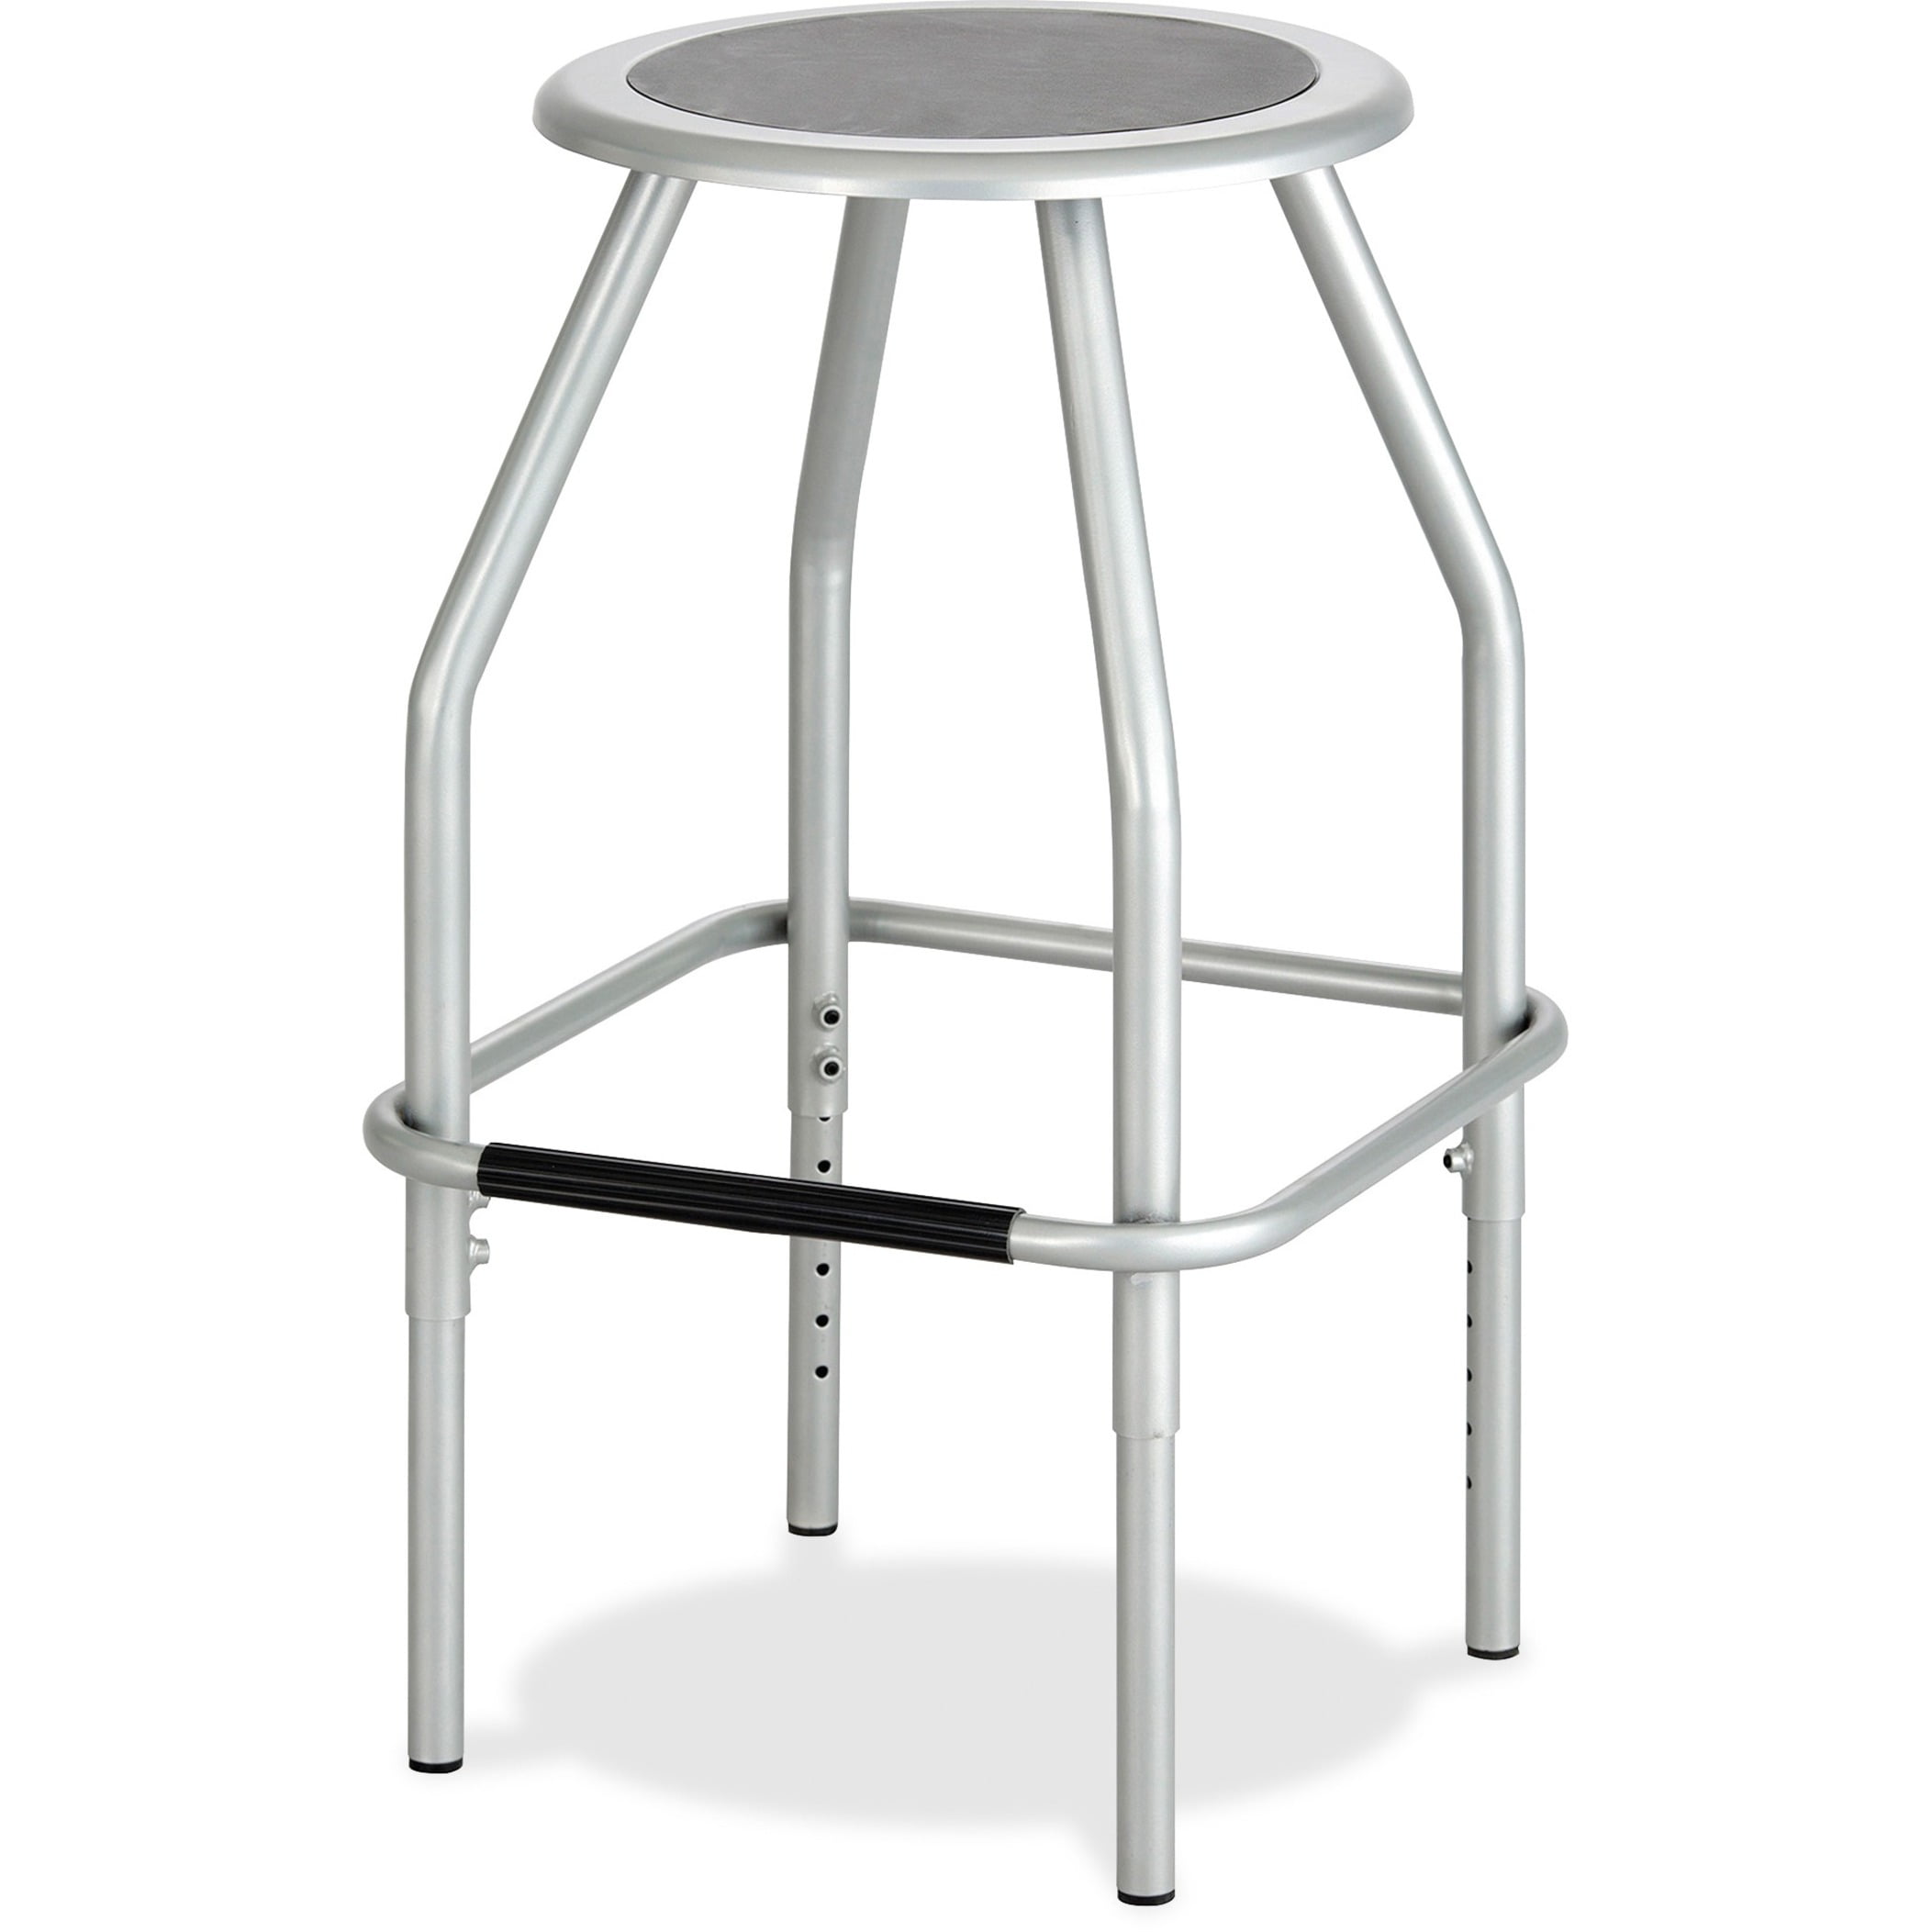 Red Safco Products Steel Stool Standard Height 